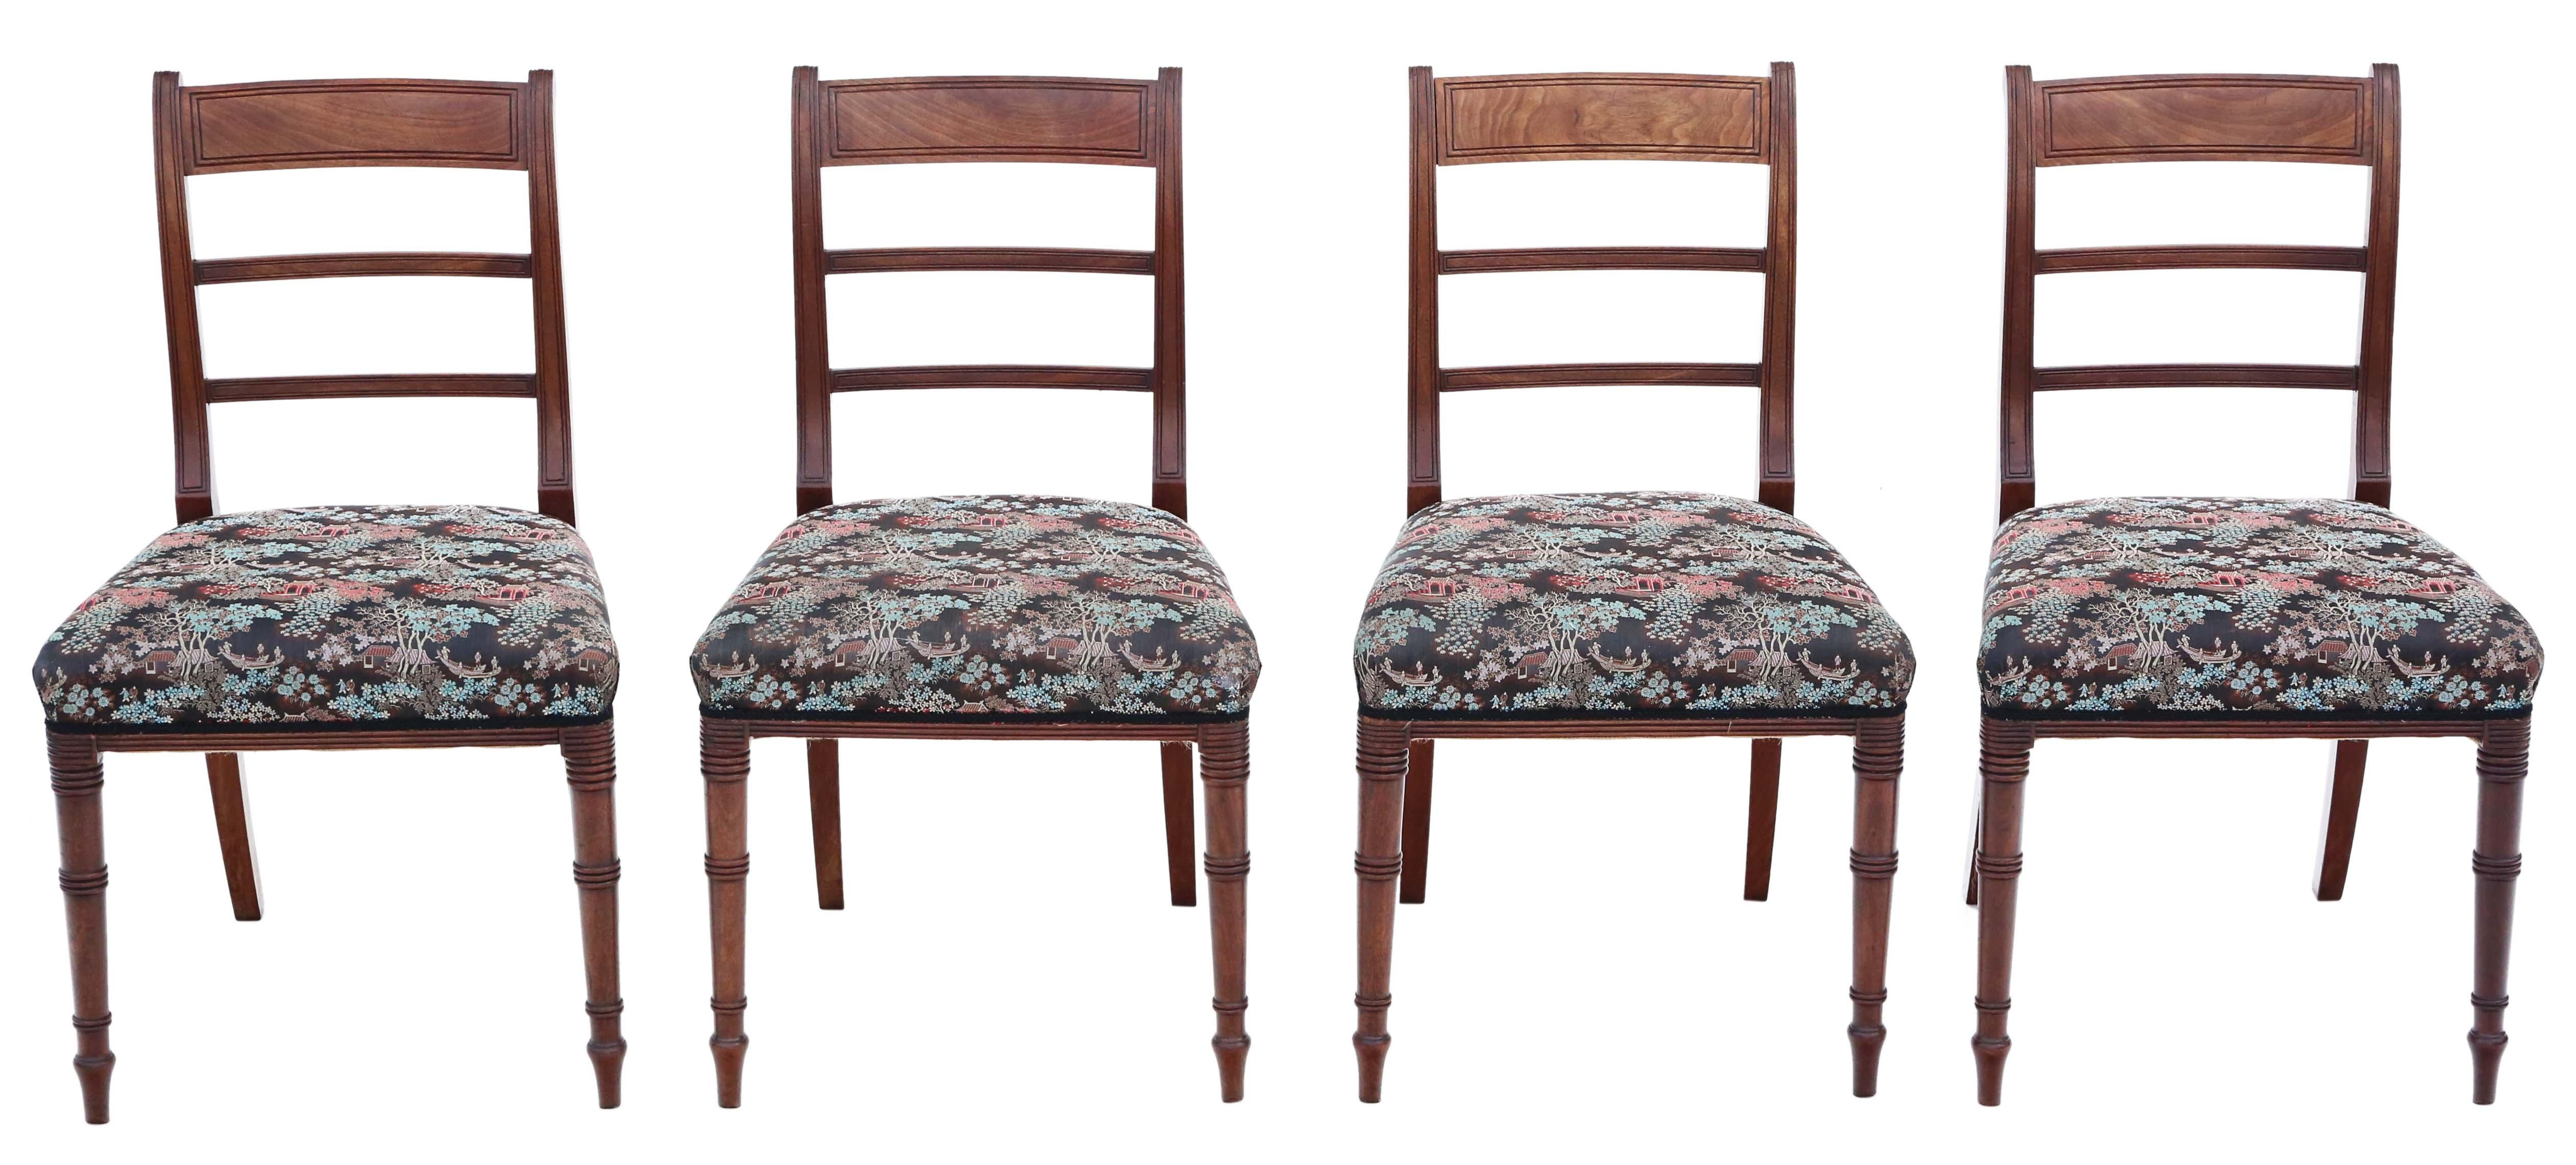 Antique quality set of 4 Georgian mahogany dining chairs C1800 Chinoiserie fabric.

No loose joints.

Recent professional upholstery in good condition. Lovely simple design.

Overall maximum dimensions: 49cmW x 53cmD x 84cmH (45cmH seat when sat